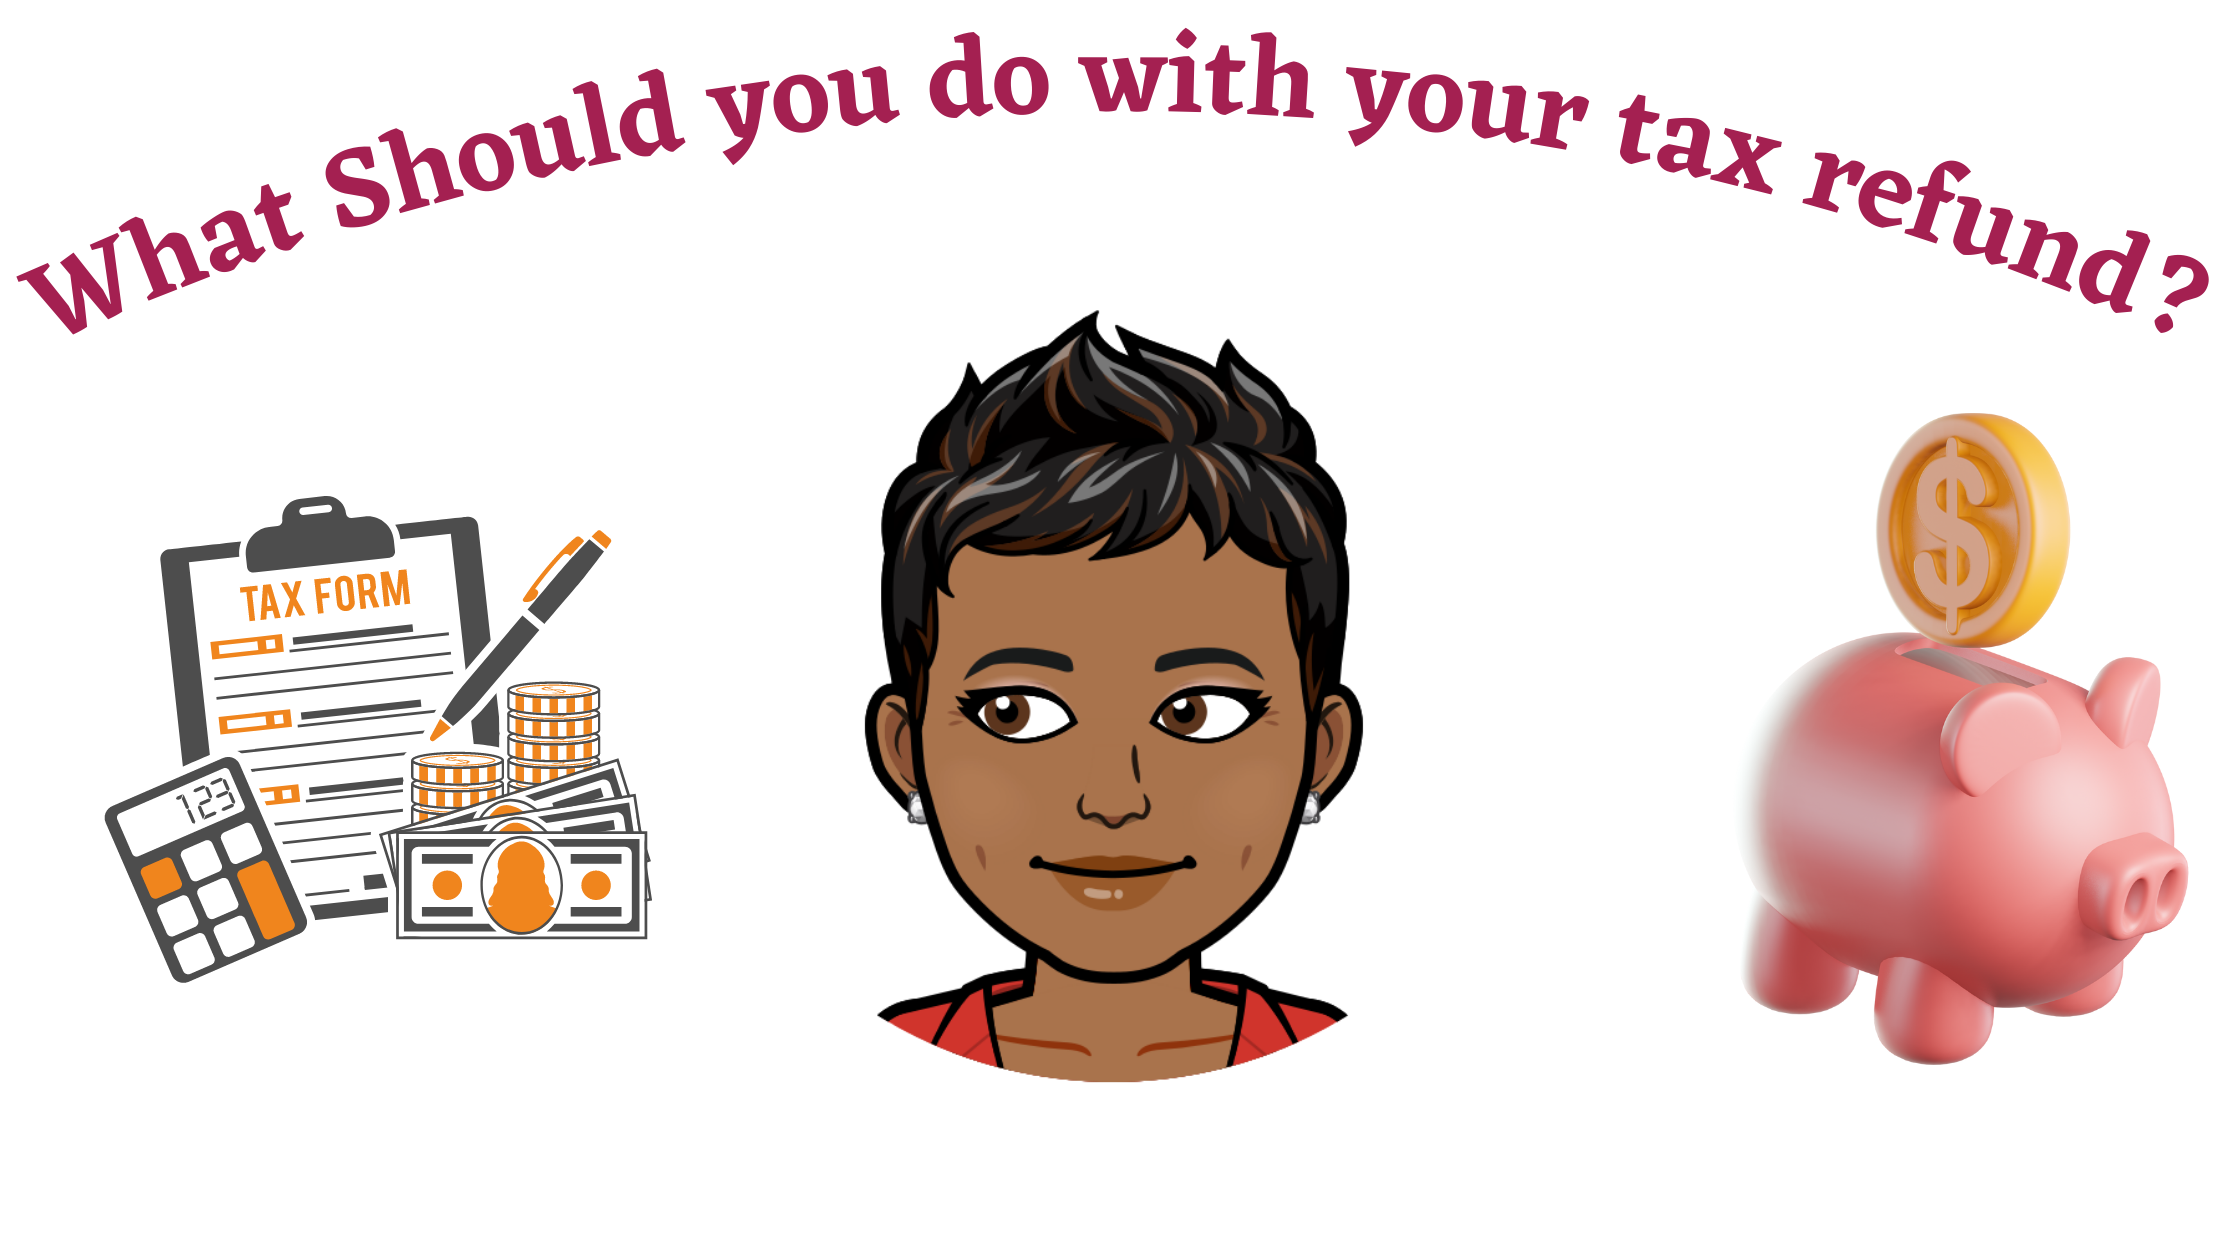 What should you do with this years tax refund